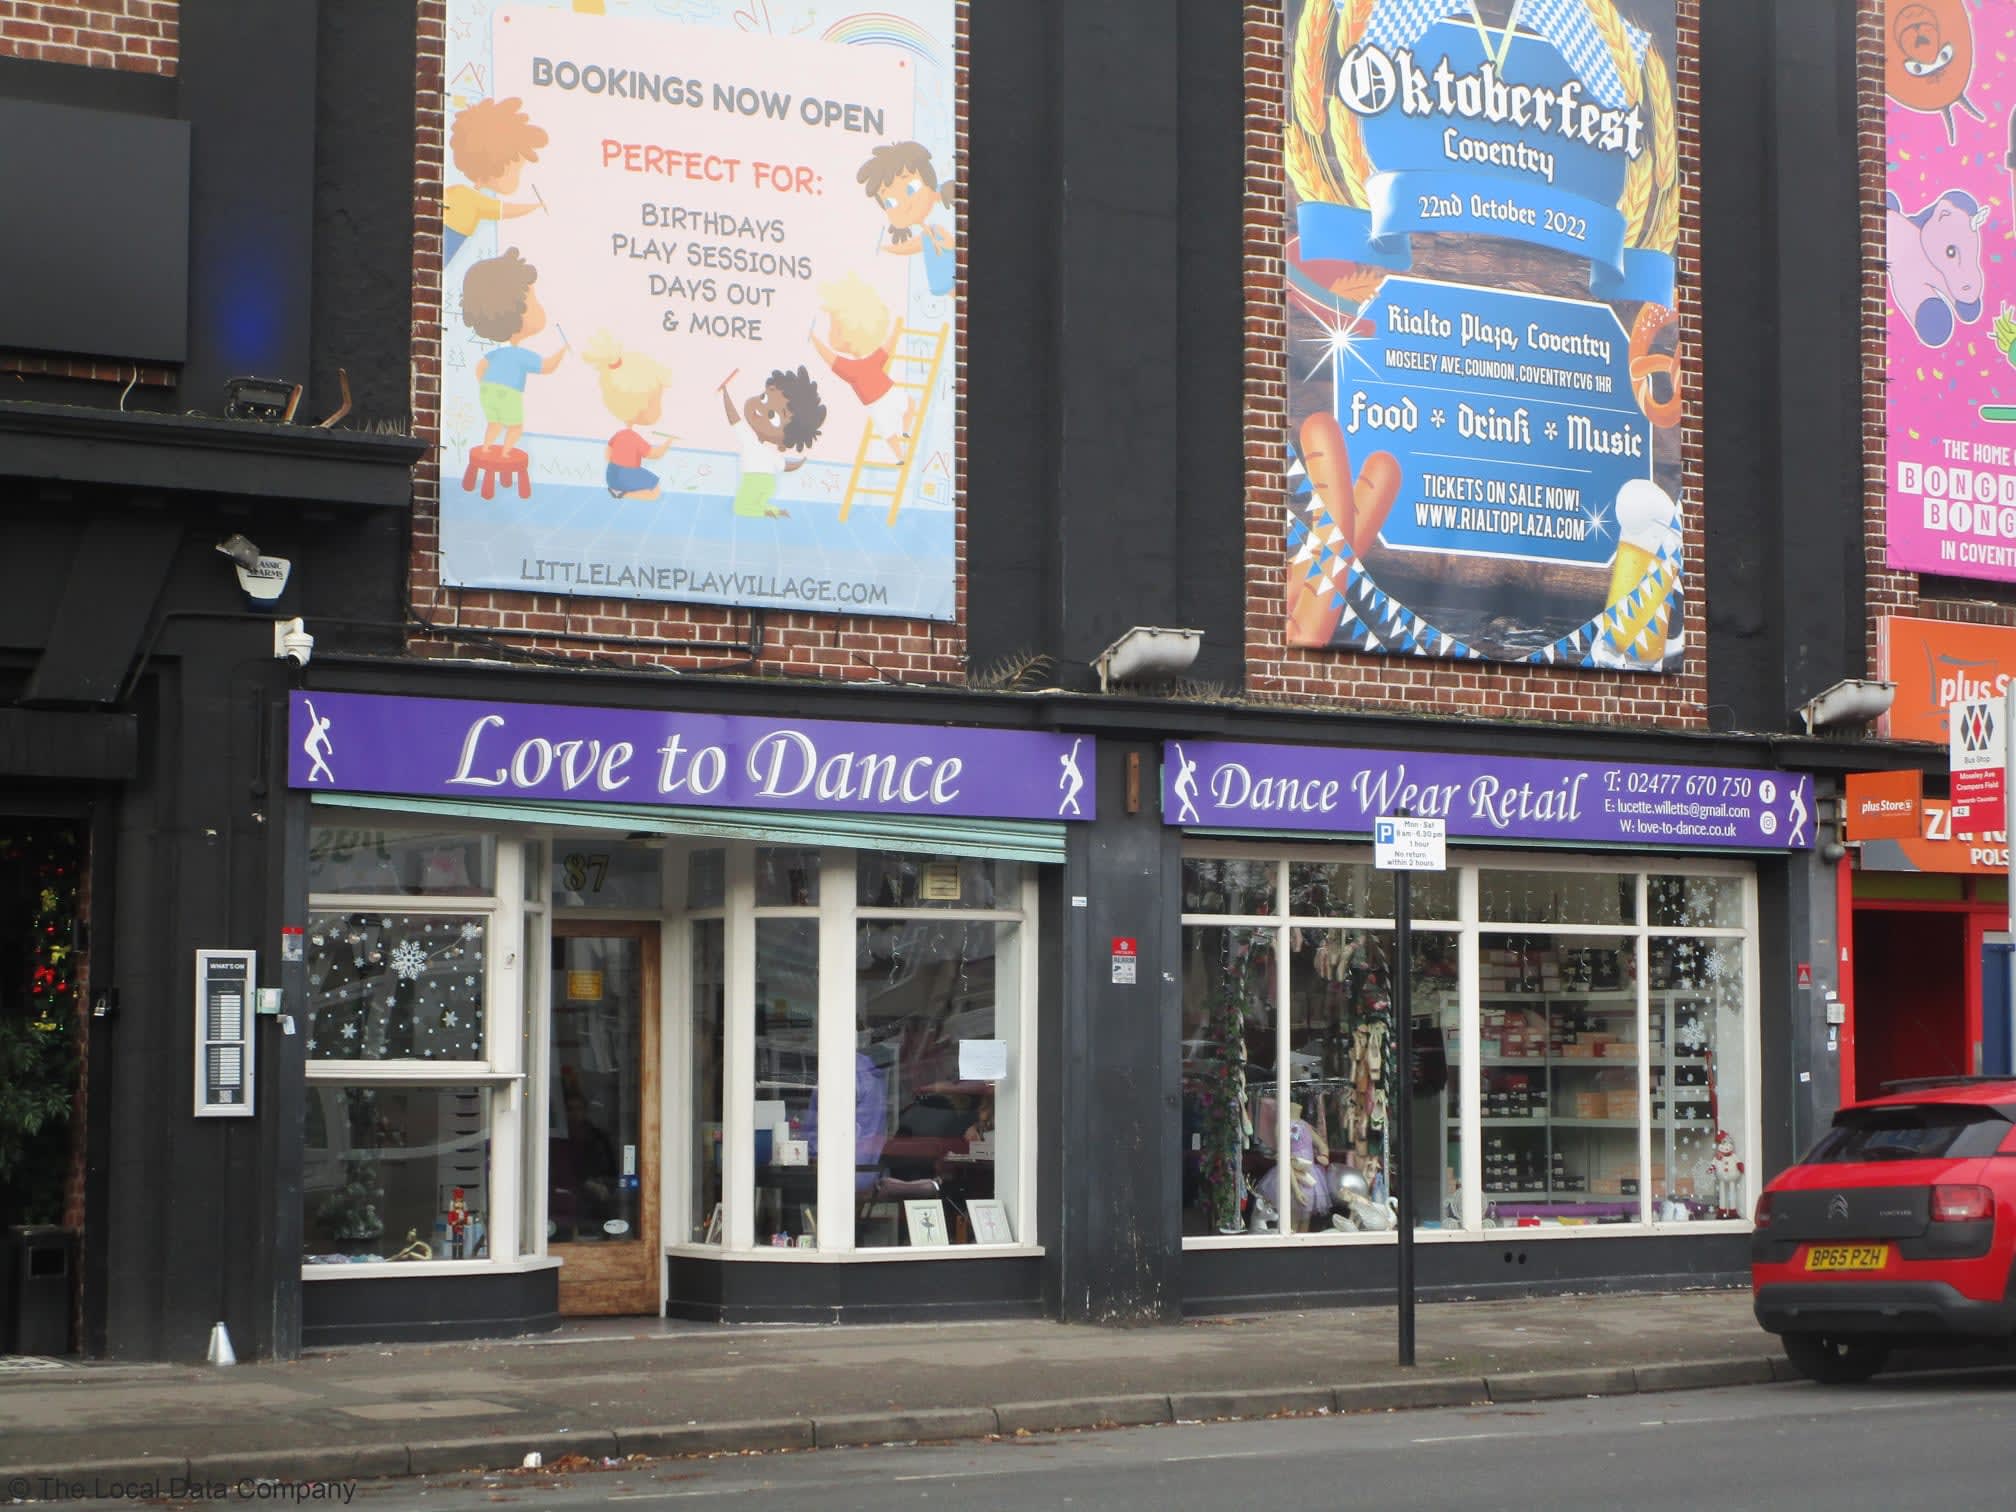 Love to Dance Coventry 02477 670750